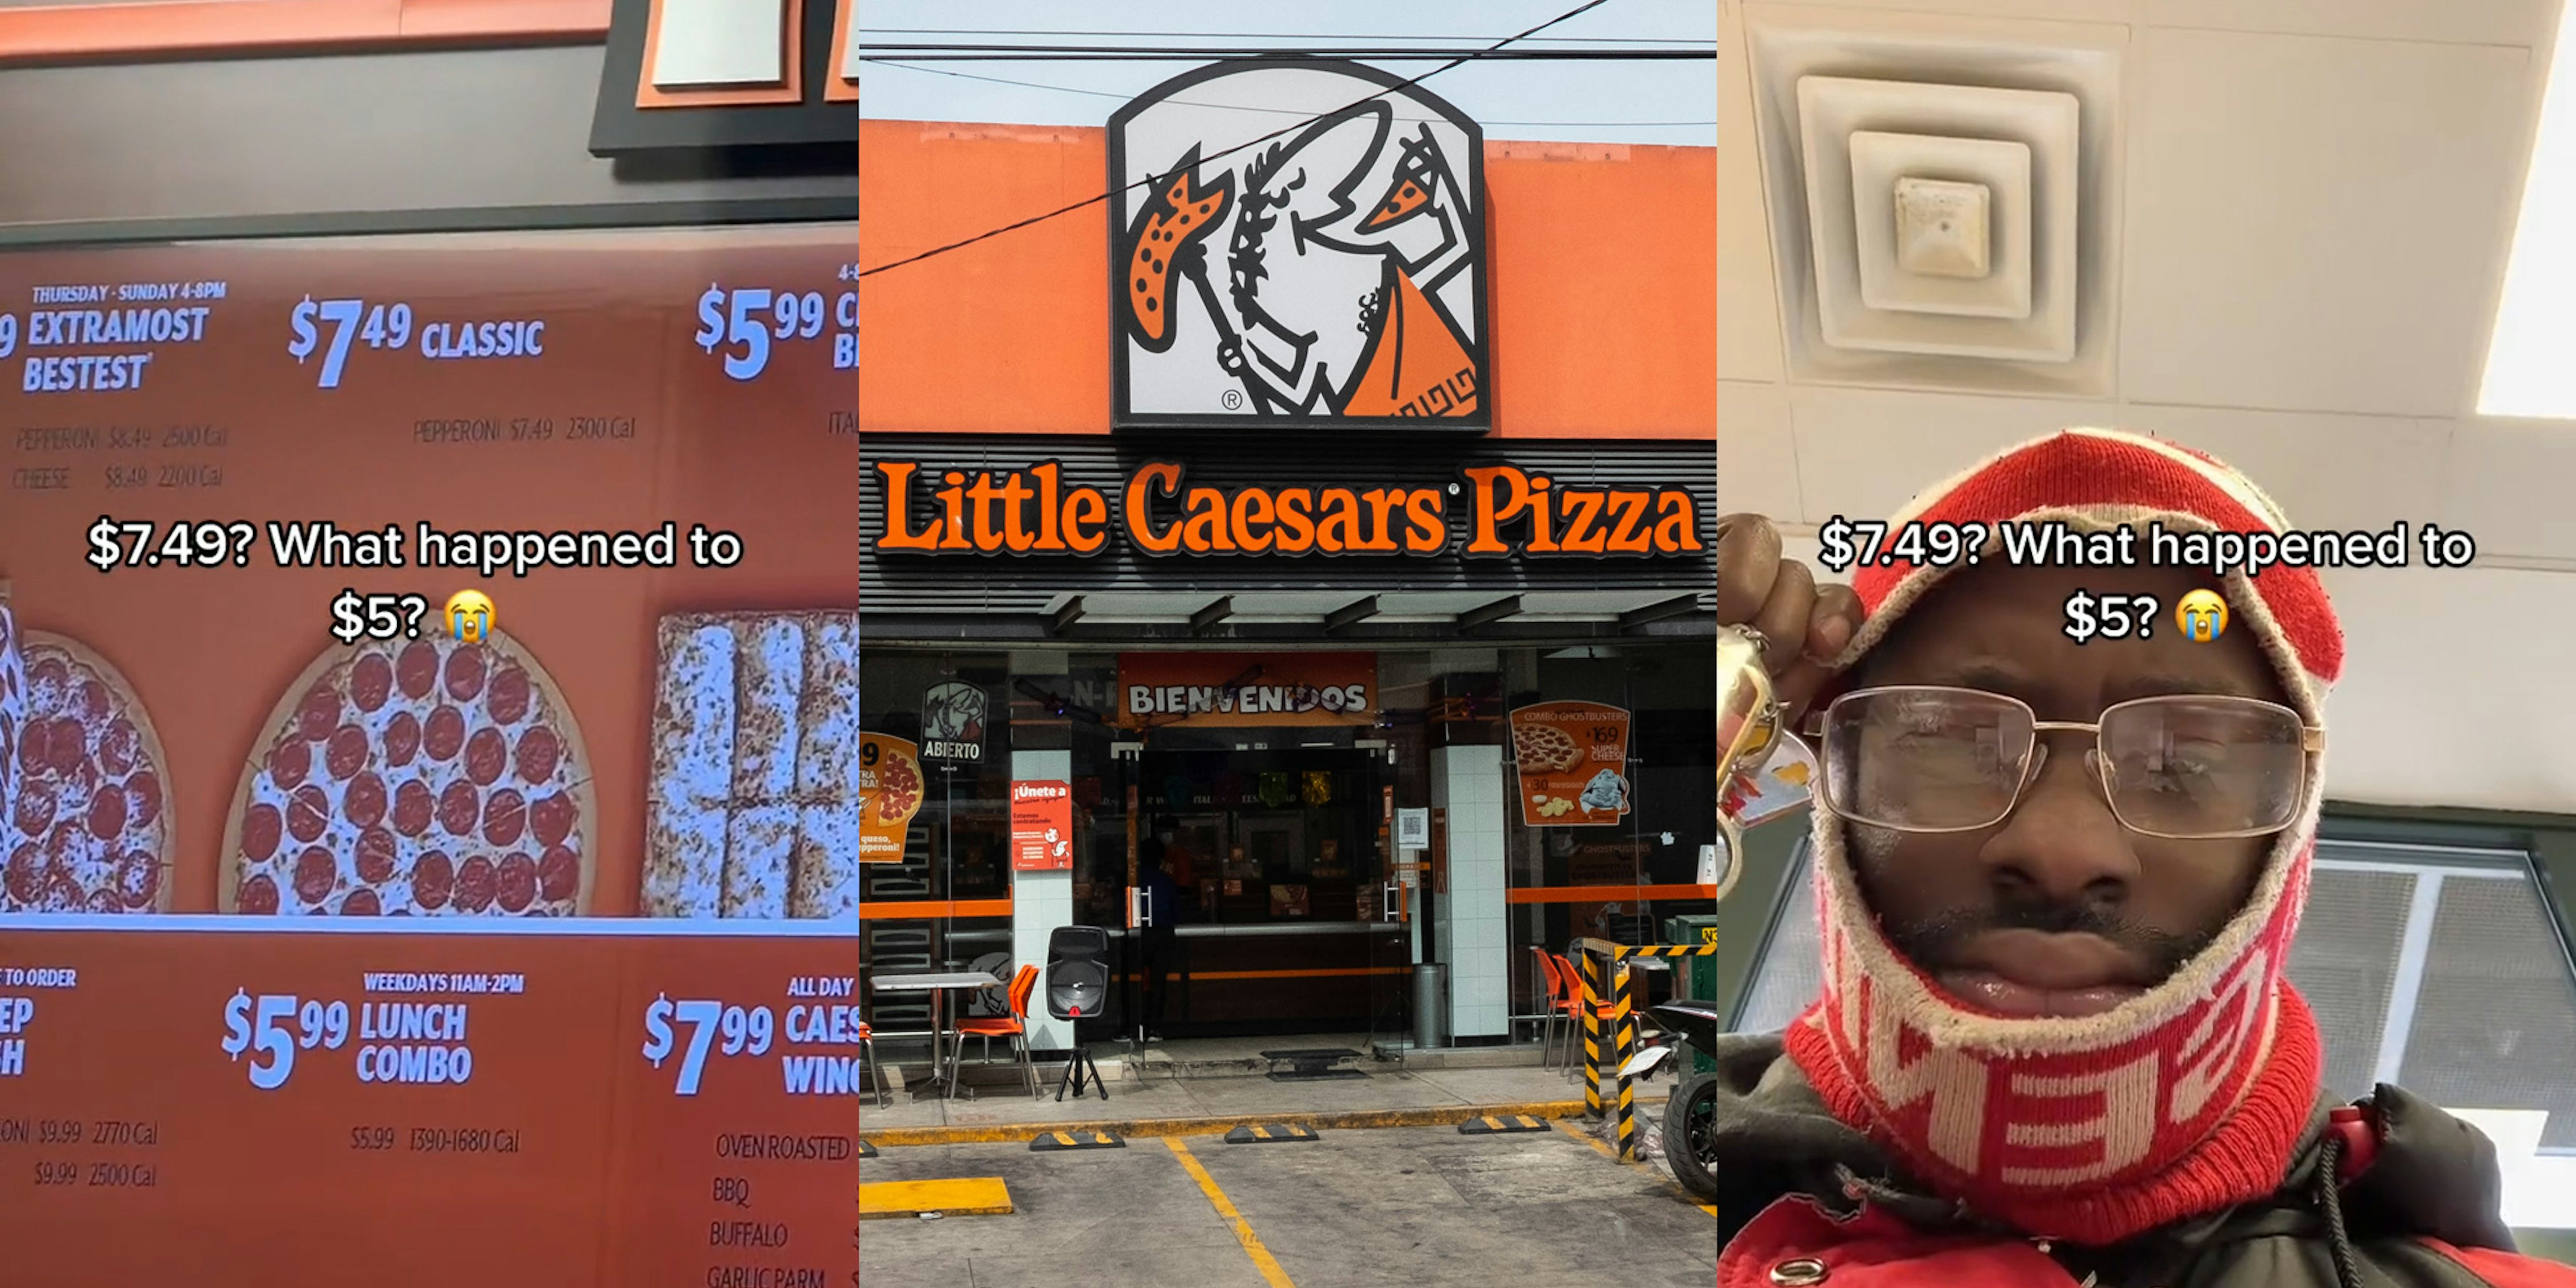 Little Caesar's interior menu with $7.49 for classic with caption '$7.49? What happened to $5?' (l) Little Caesar's sign on building (c) man inside Little Caesar's with caption '$7.49? What happened to $5?' (r)